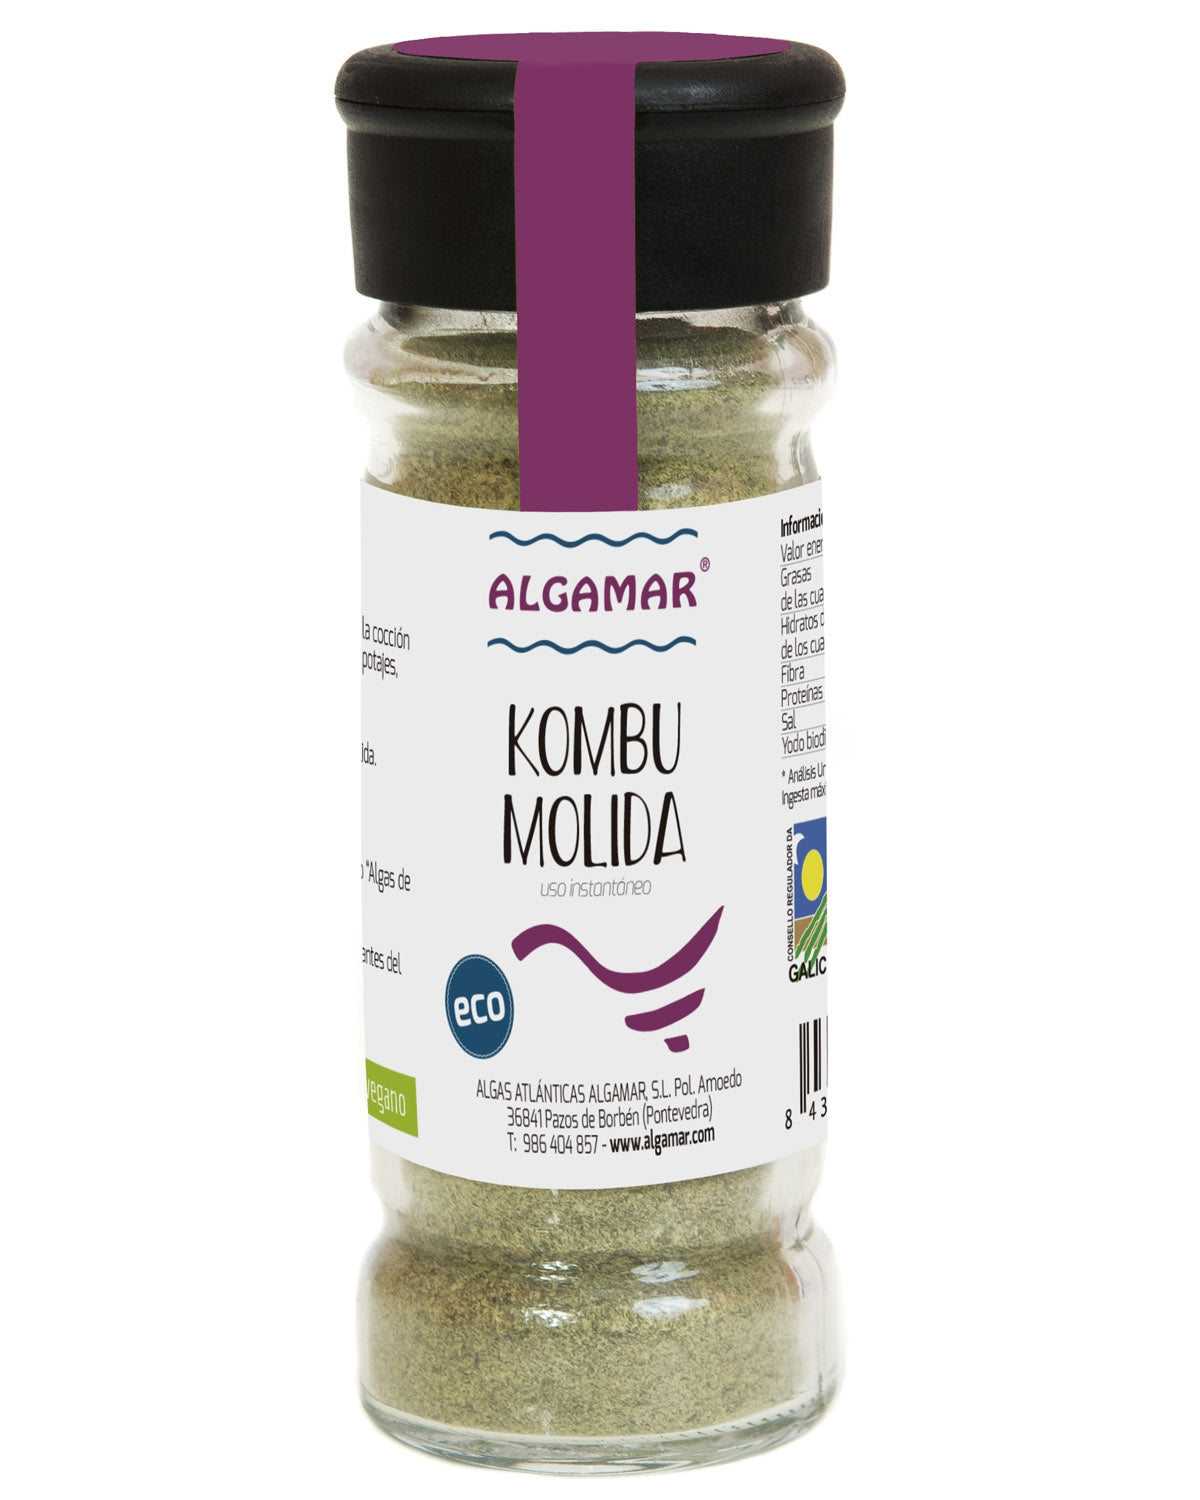 Organic Kombu 70g | Algamar | Raw Living UK | Sea Vegetables | Raw Foods | Algamar&#39;s Dried Kombu is a Sea Vegetable very Rich in Minerals. Use this Seaweed place of fish sauce in your Asian recipes for an addictive Umami Flavour.